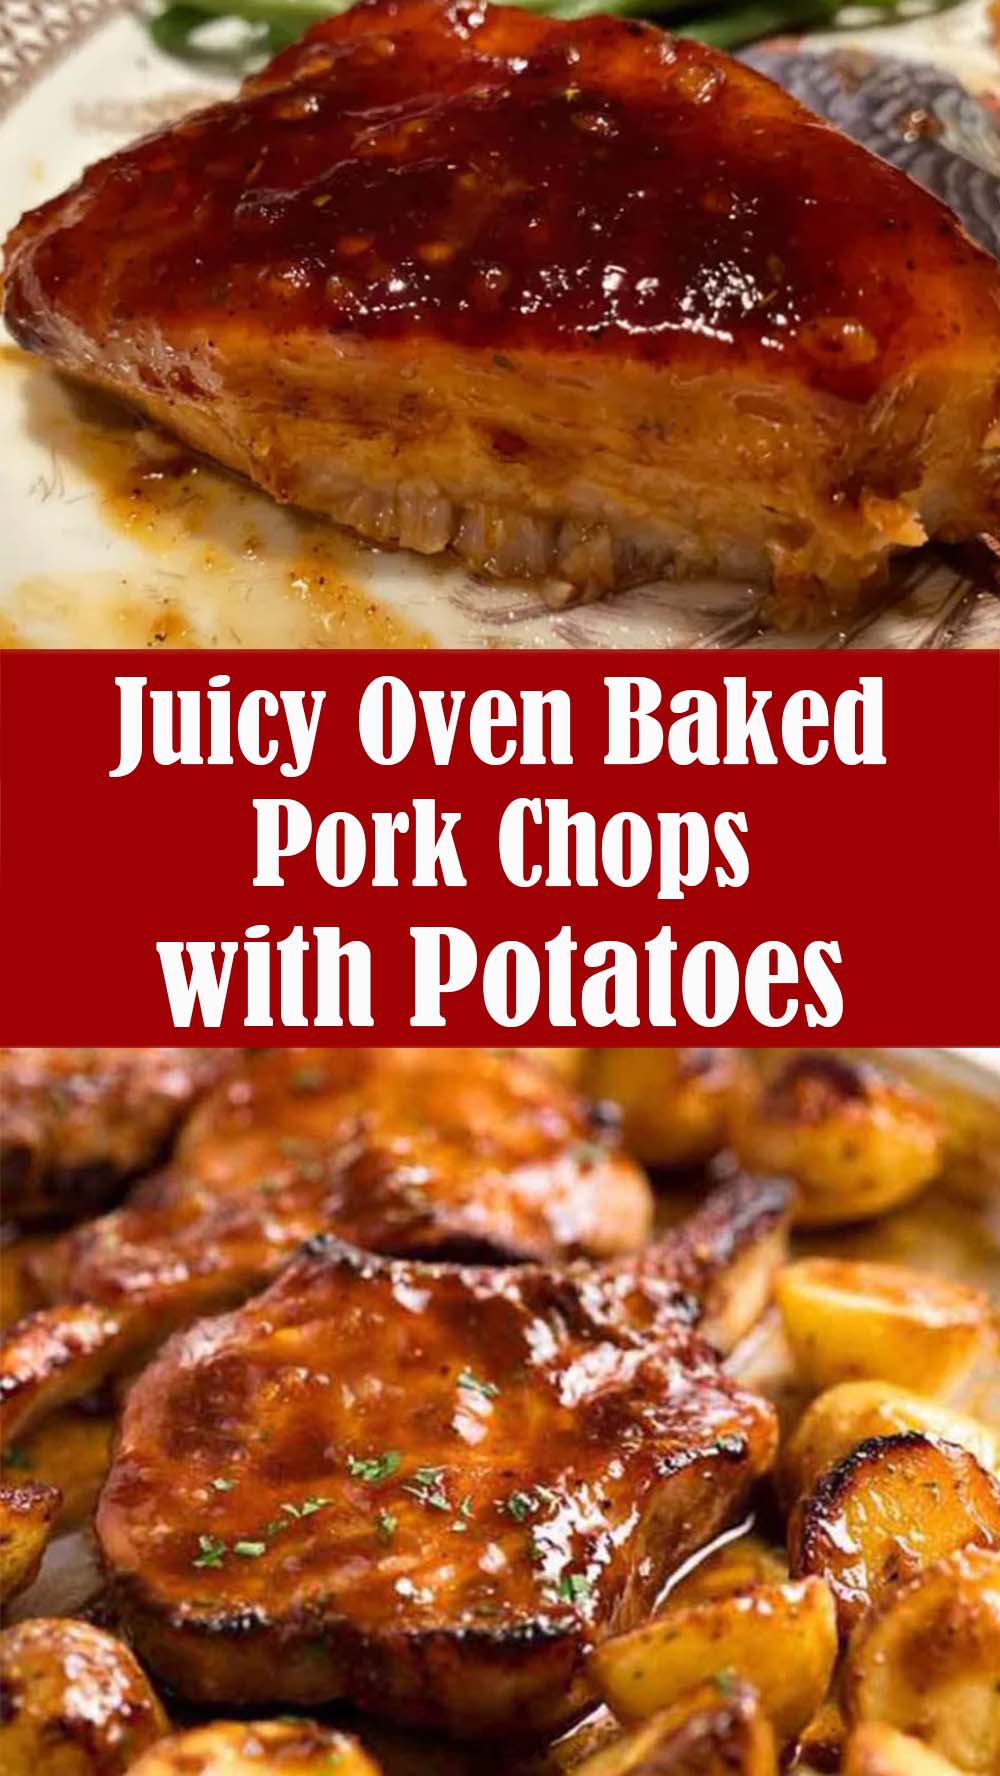 Juicy Oven Baked Pork Chops with Potatoes